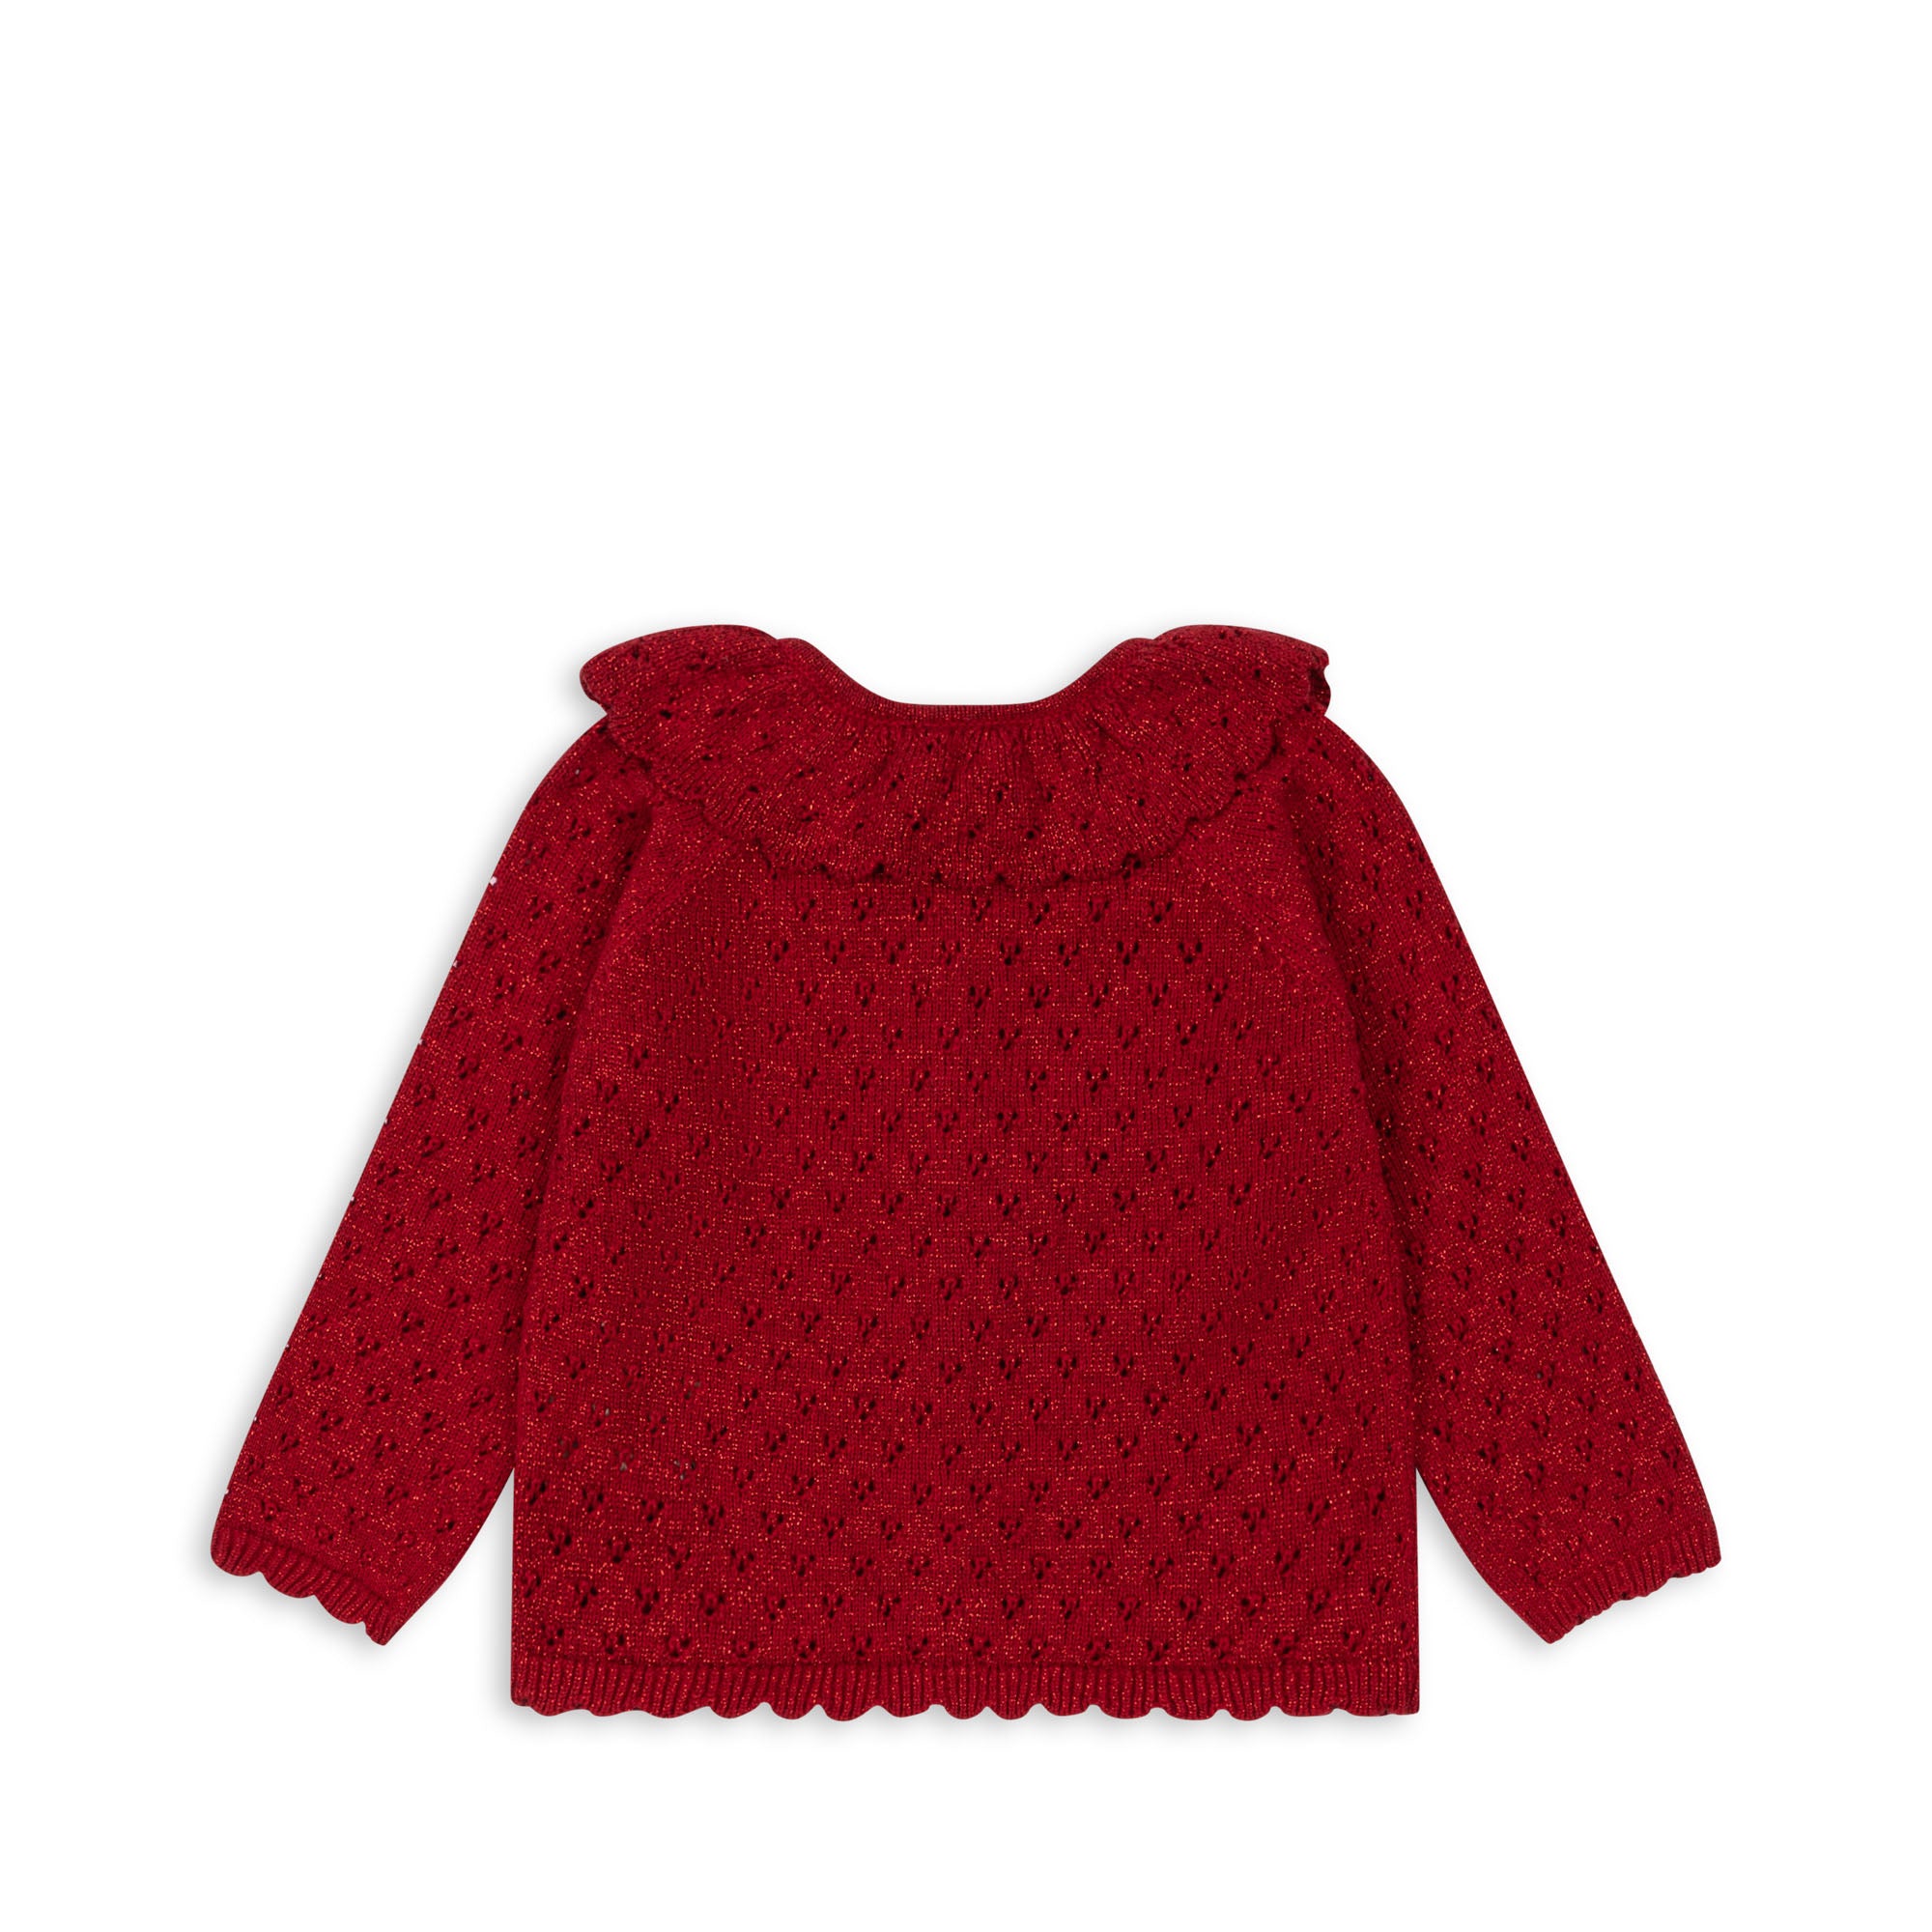 Konges Sløjd A/S Knitted Cardigans savy red